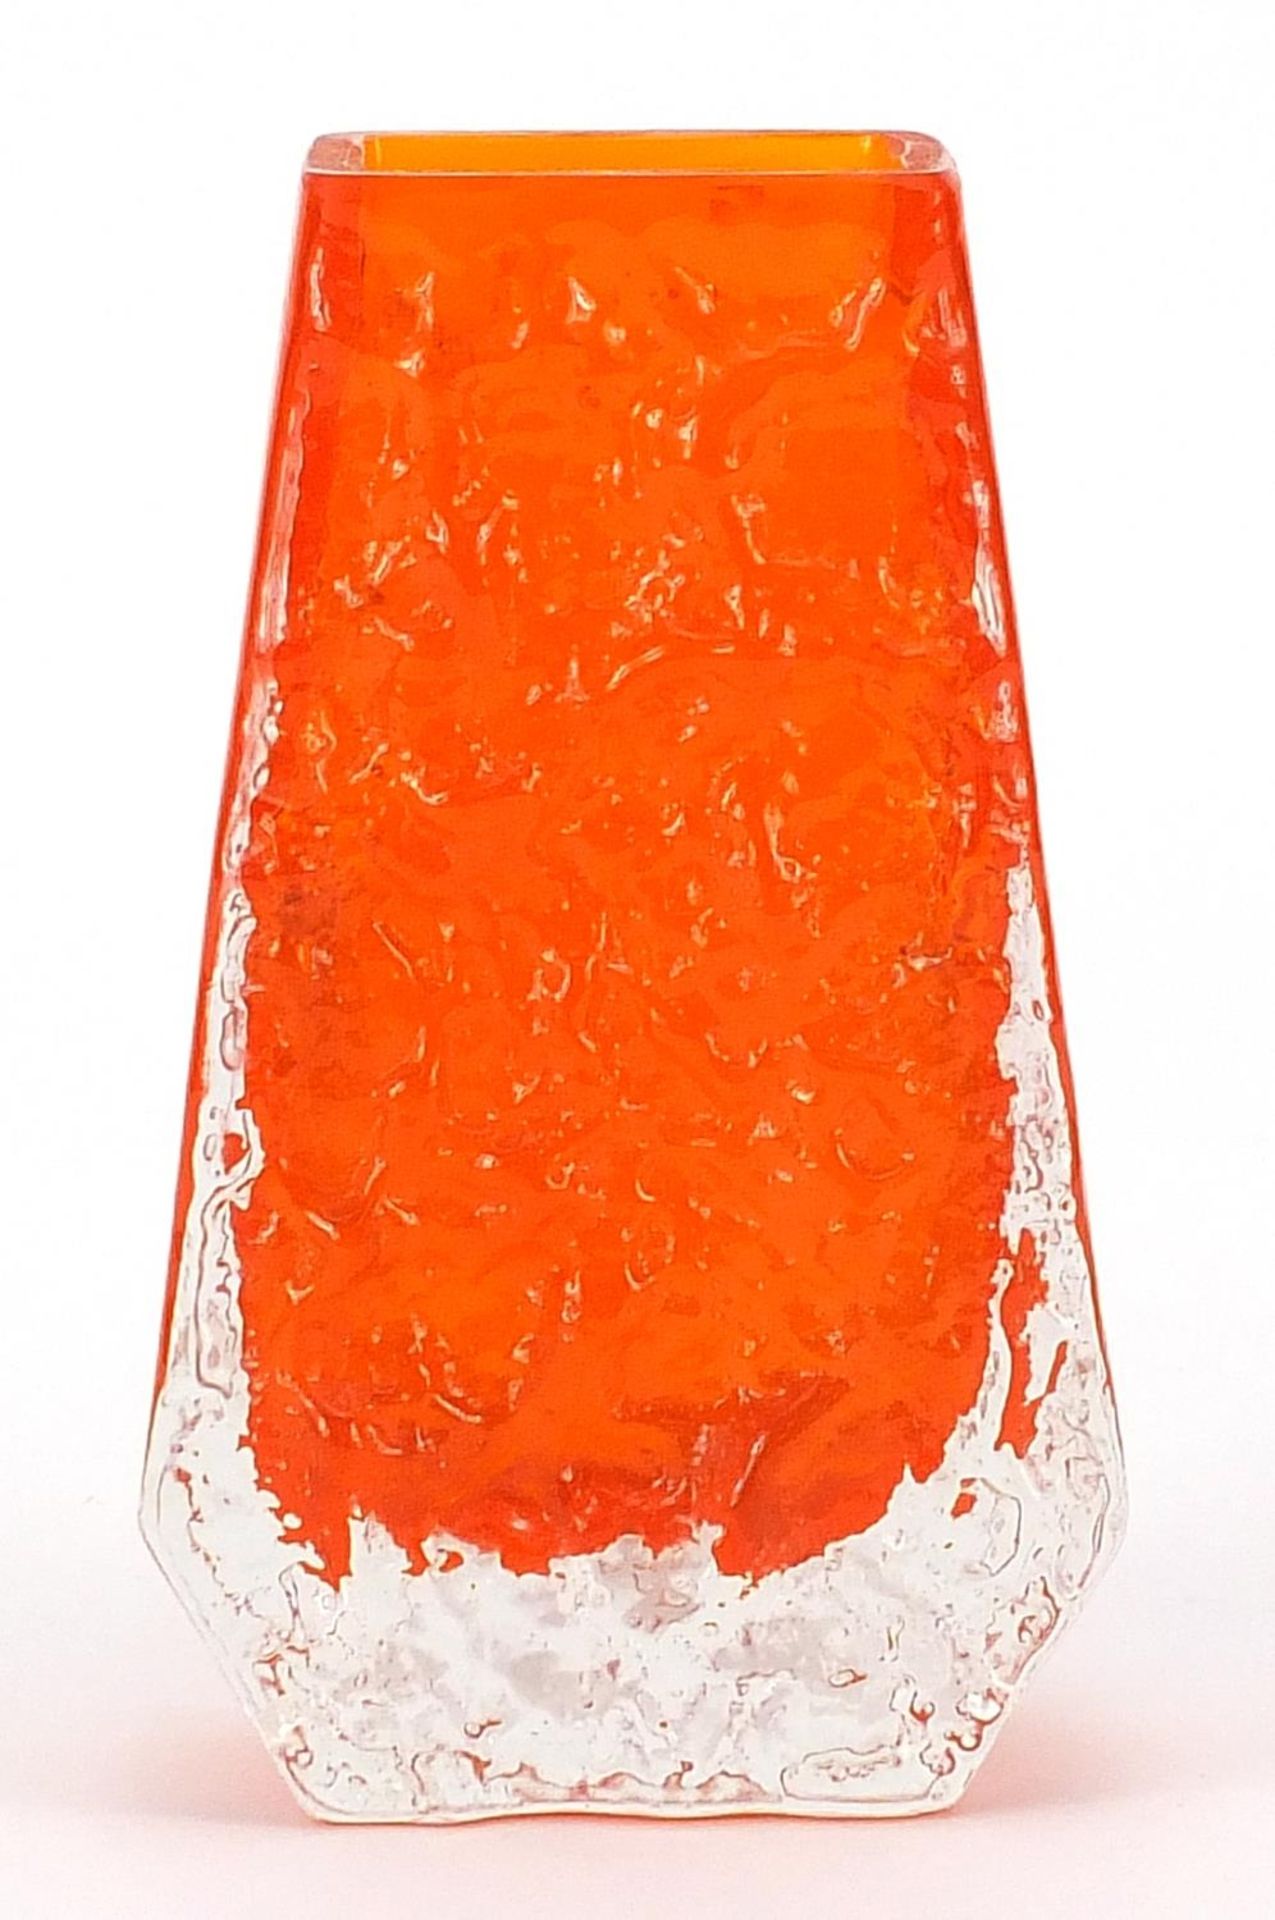 Geoffrey Baxter for Whitefriars, glass coffin vase in tangerine, 13cm high - Image 2 of 3